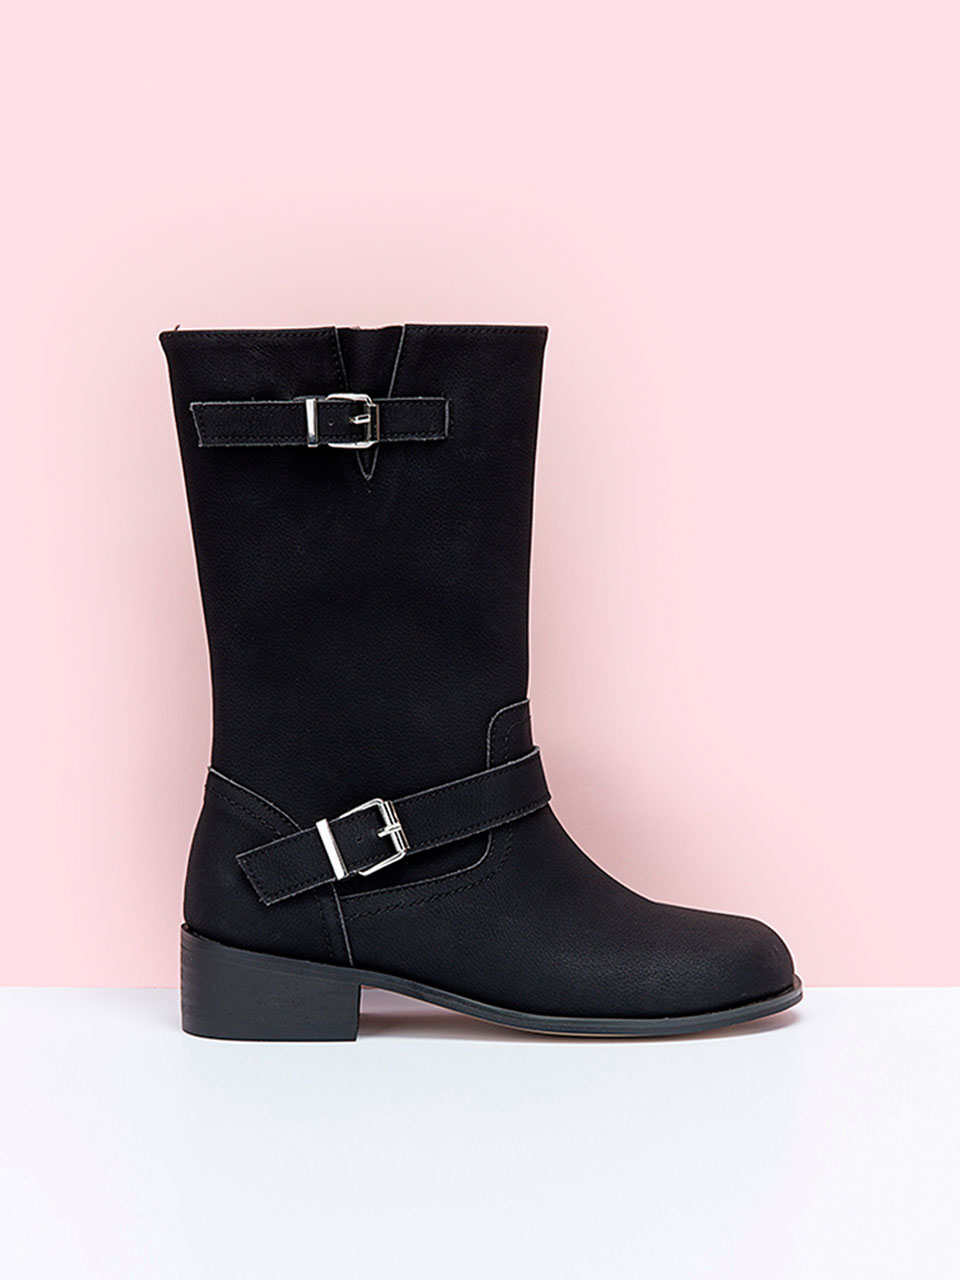 Buckle Middle Boots (Black)